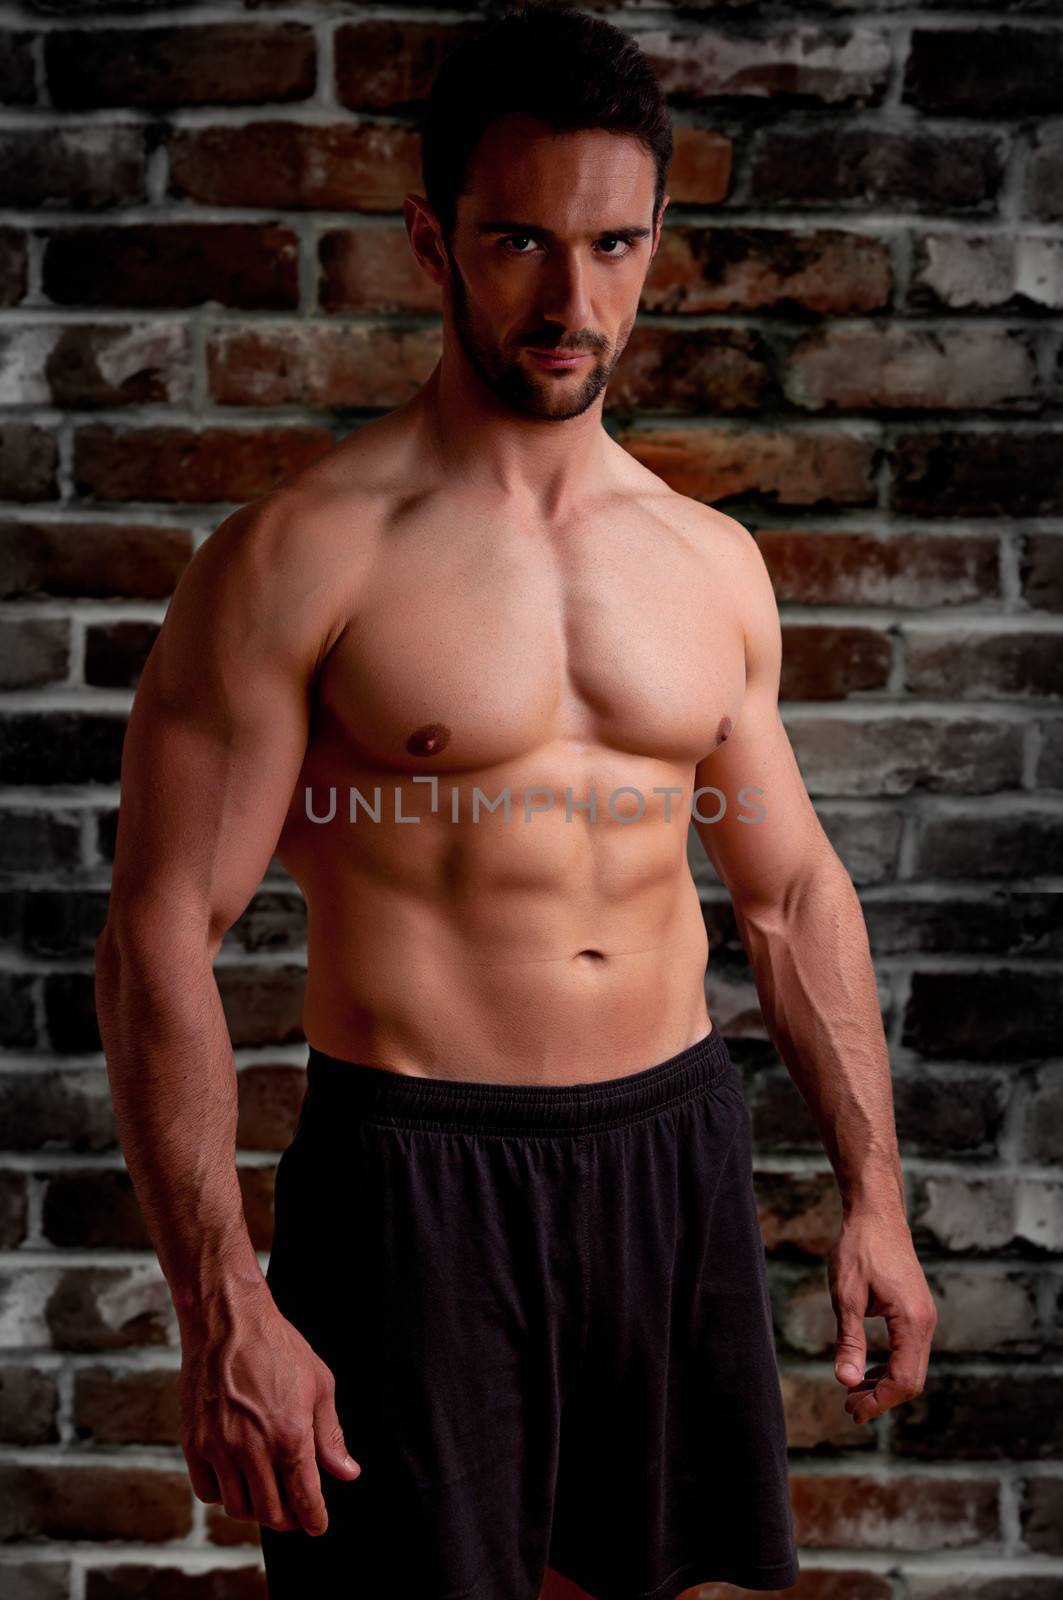 Male model looking mean and dangerous with a brick dark background